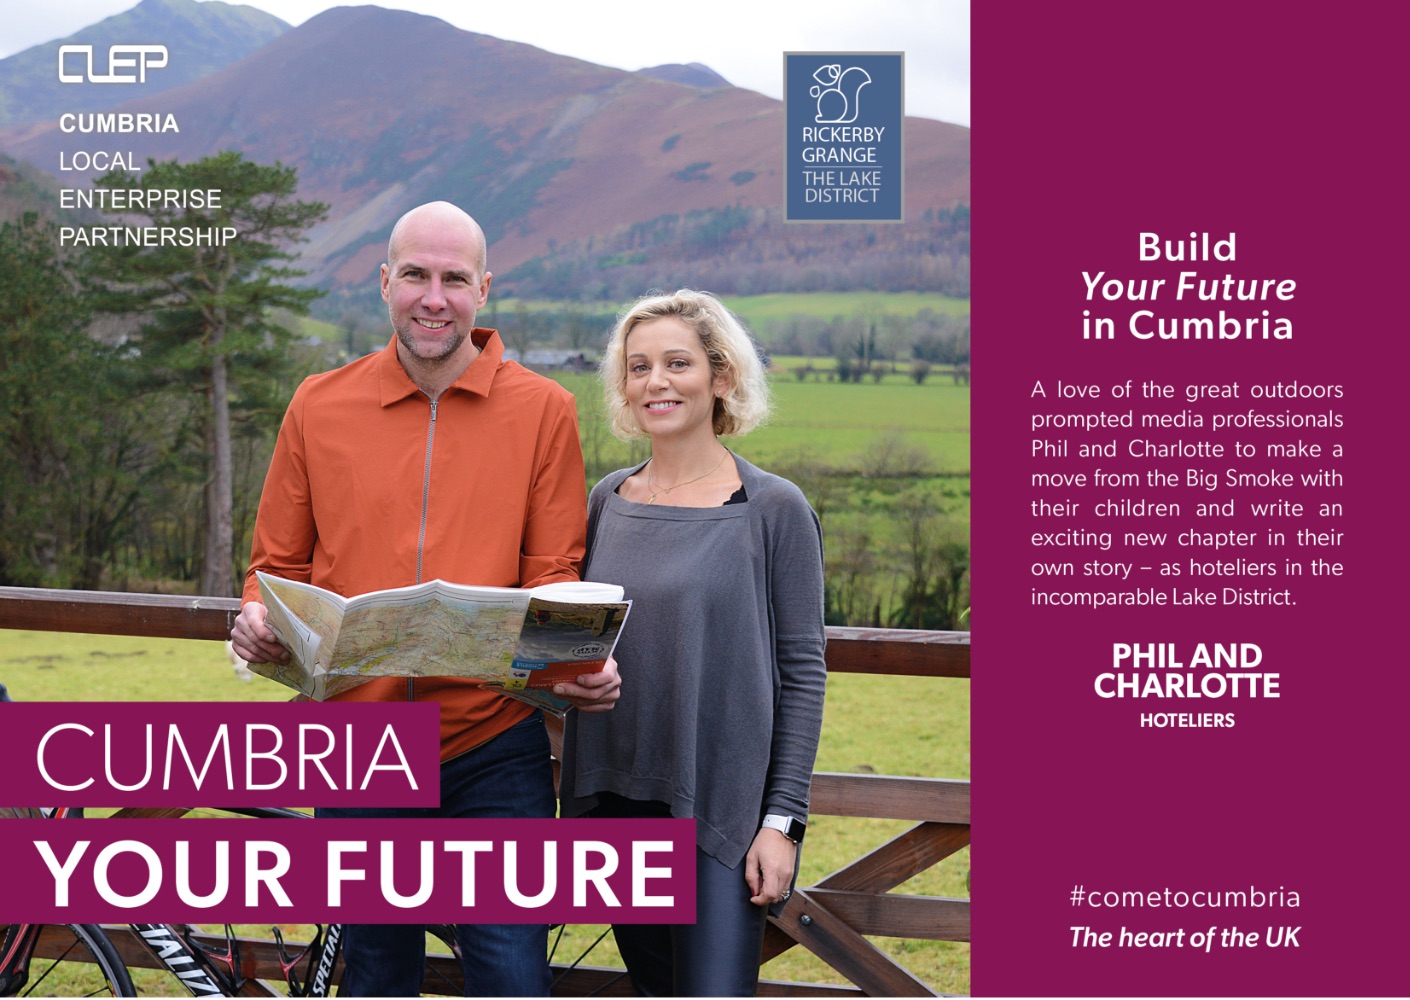 Build Your Future In Cumbria: A love of the great outdoors prompted media professionals Phil and Charlotte to make a move from the Big Smoke with their children and write a new chapter in their own story - as hoteliers in the incomparable Lake District. (Photo: Phil and Charlotte, hoteliers).